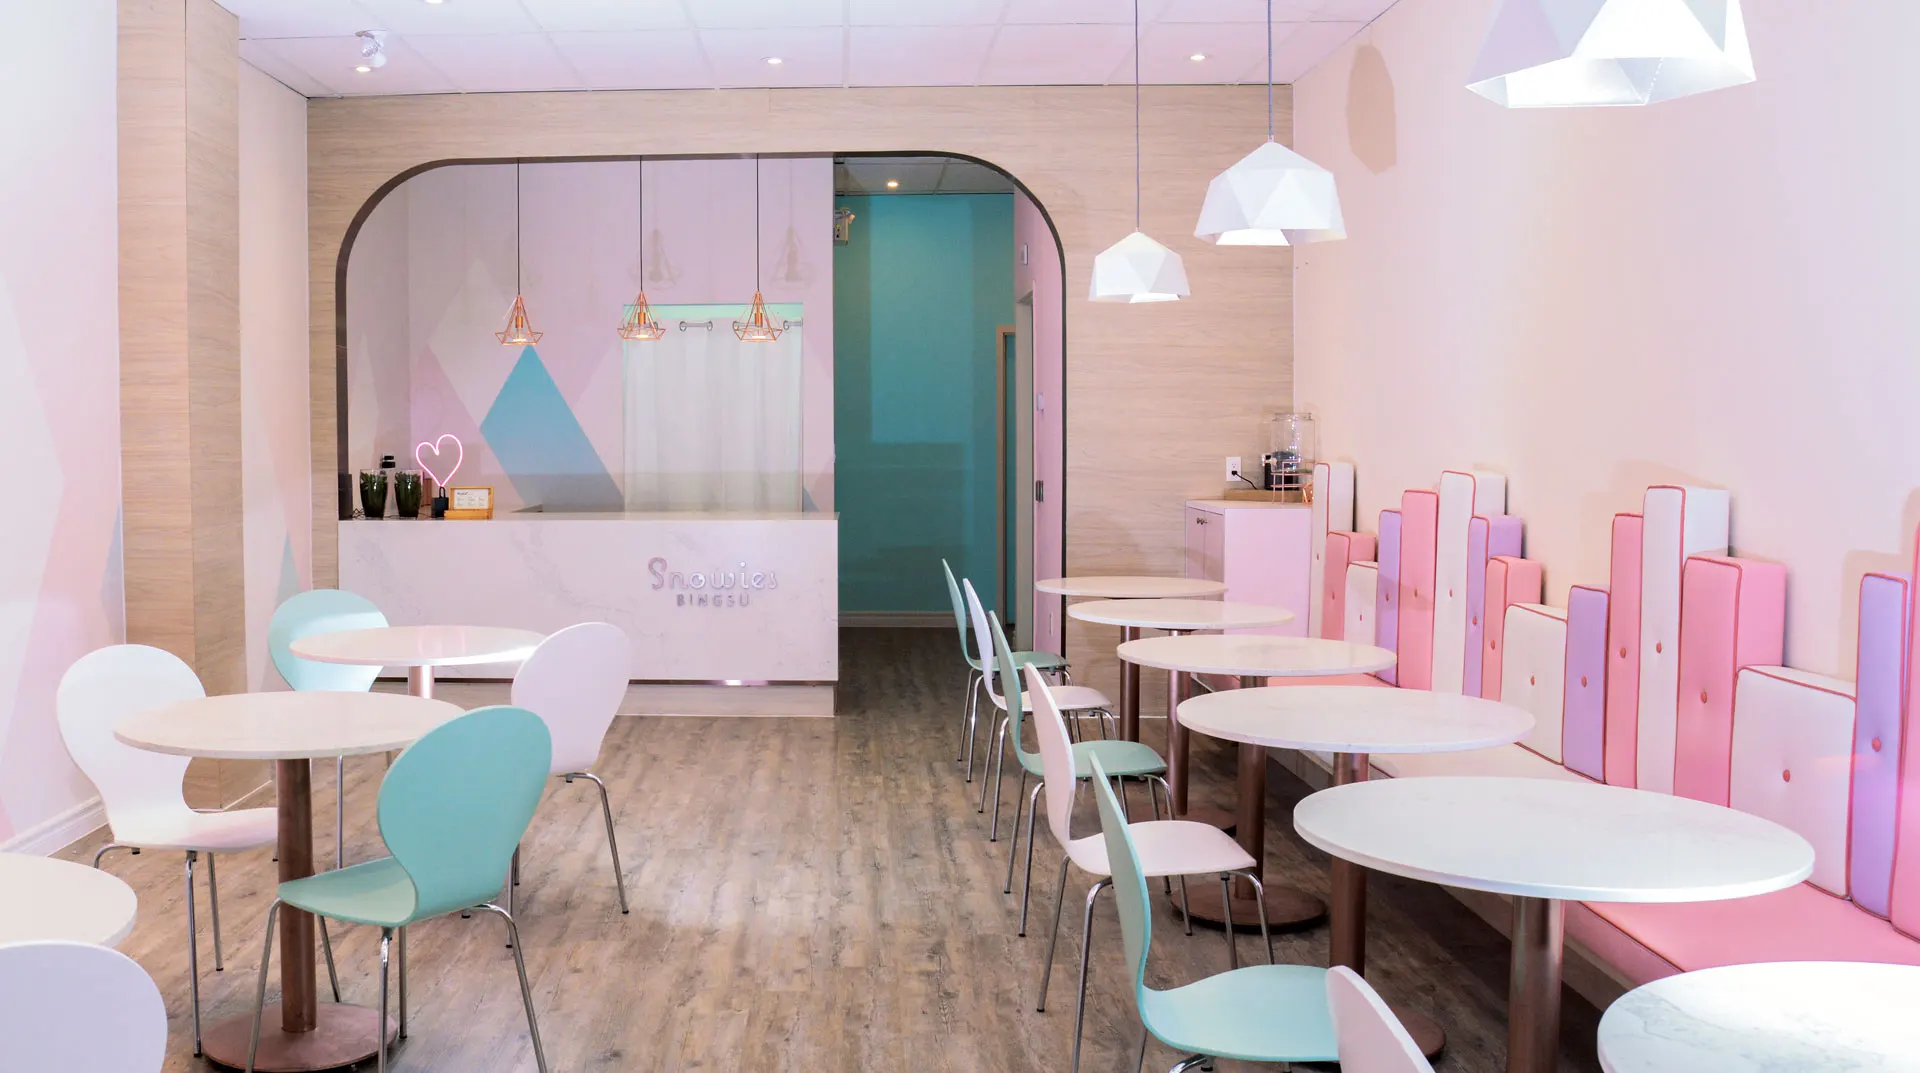 Interior design project for Snowies. Designed the store with soft and welcoming atmosphere